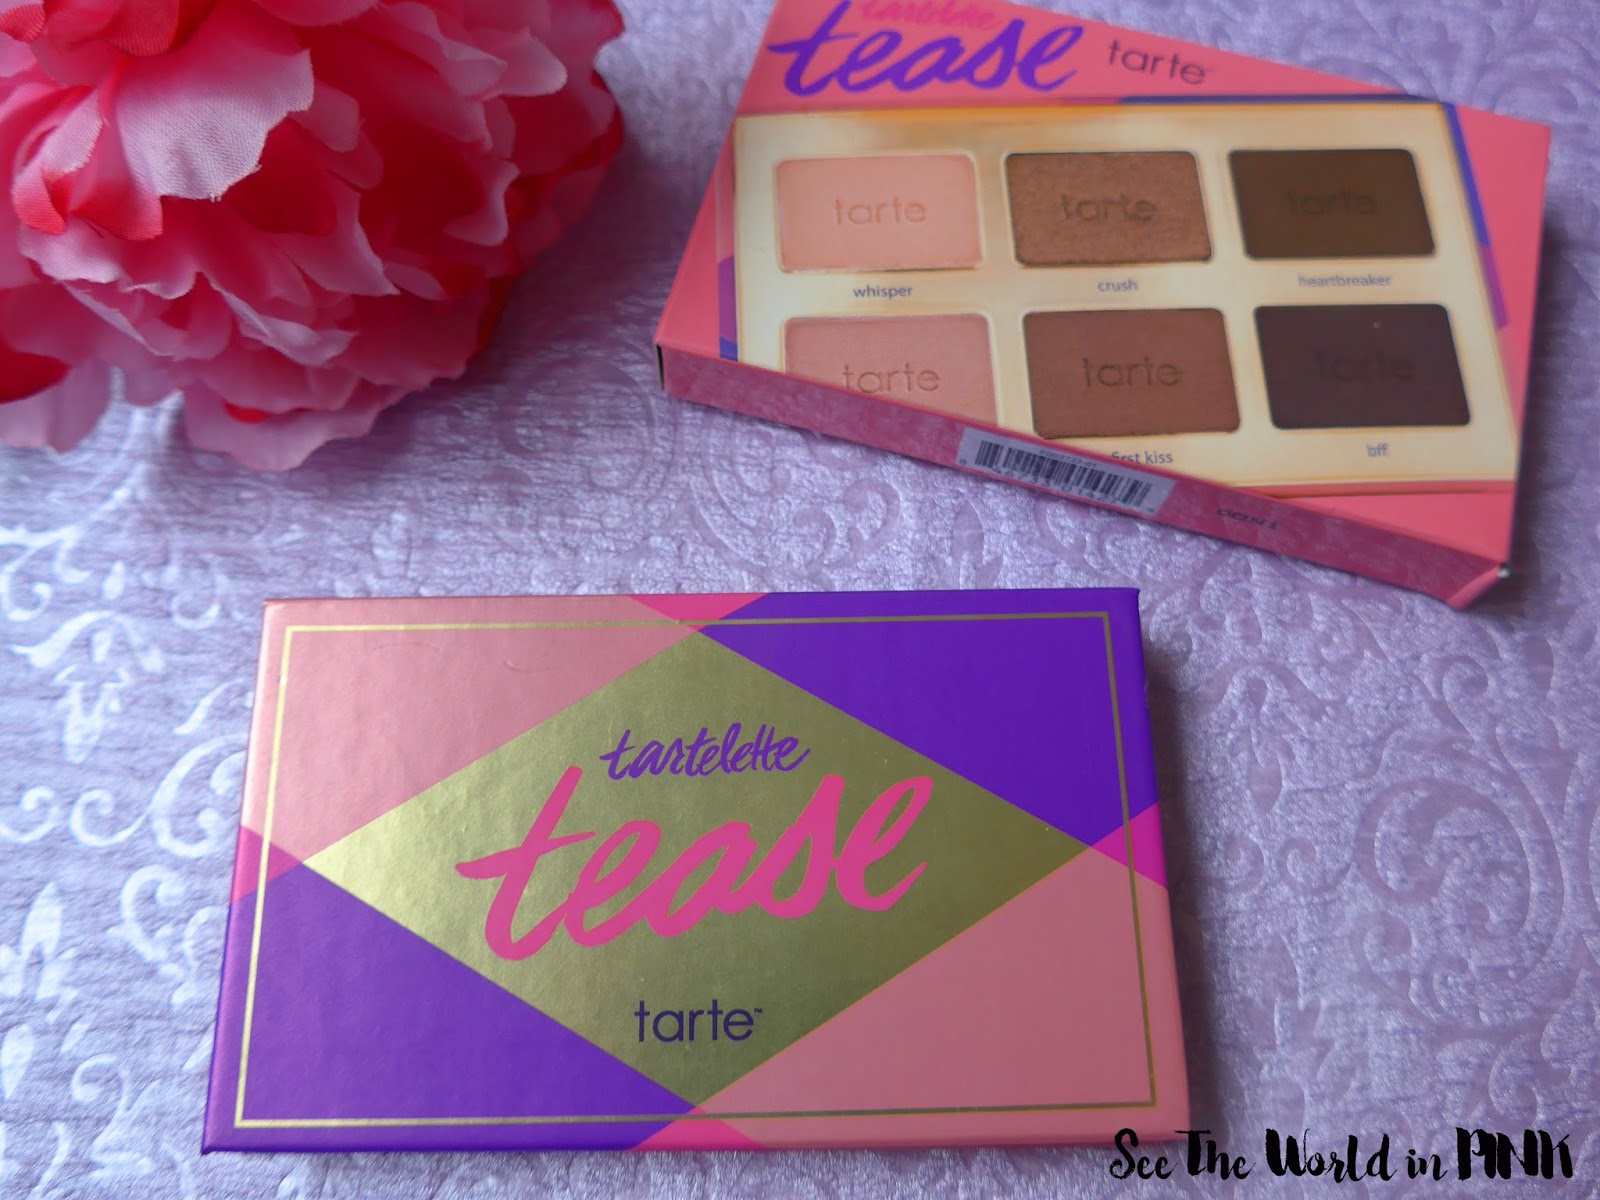 Tarte Tartelette Tease Eyeshadow Palette - Review, Swatches, and Makeup Looks 